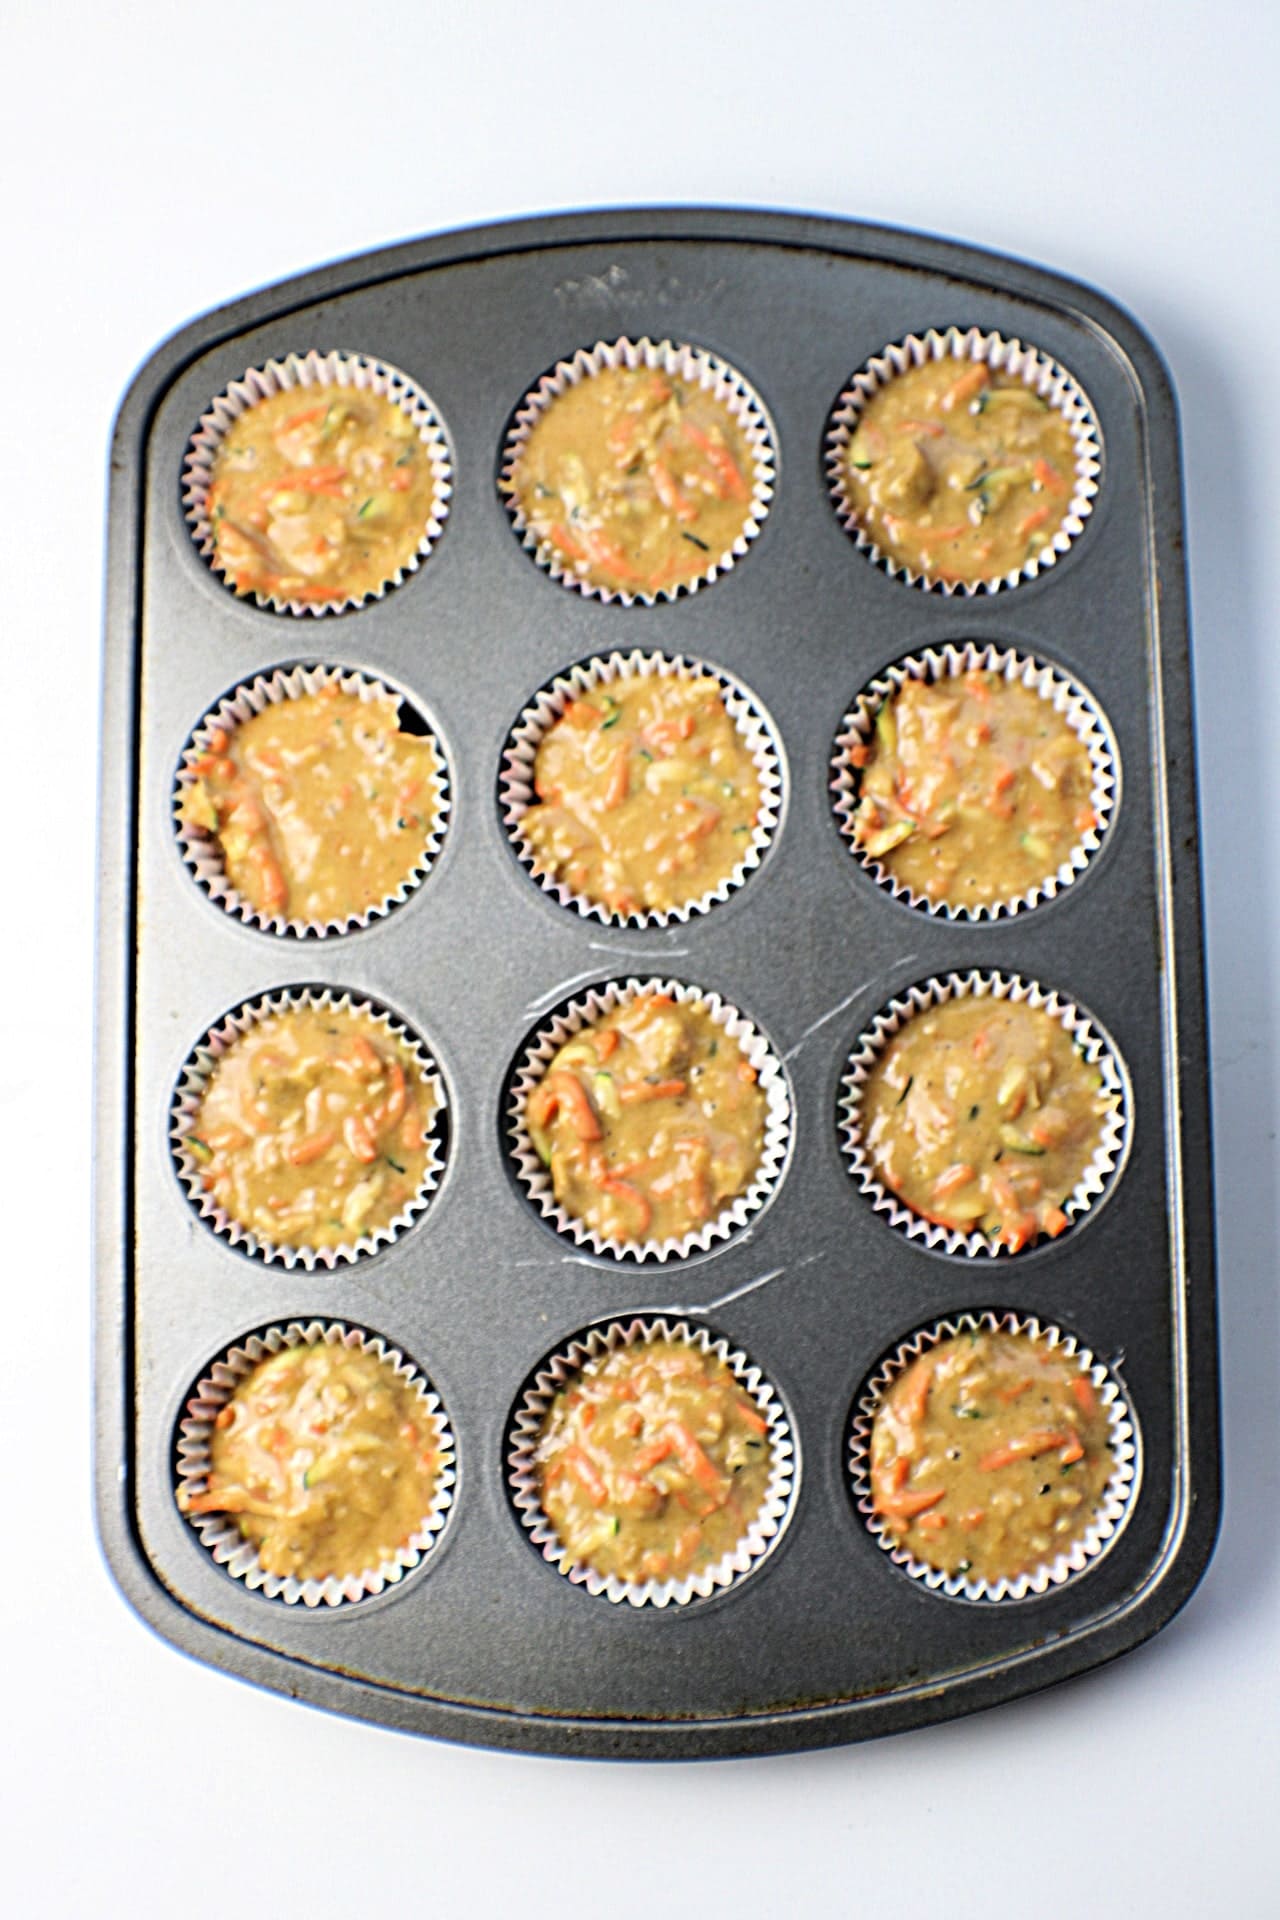 Morning Glory Muffins batter in muffin pan